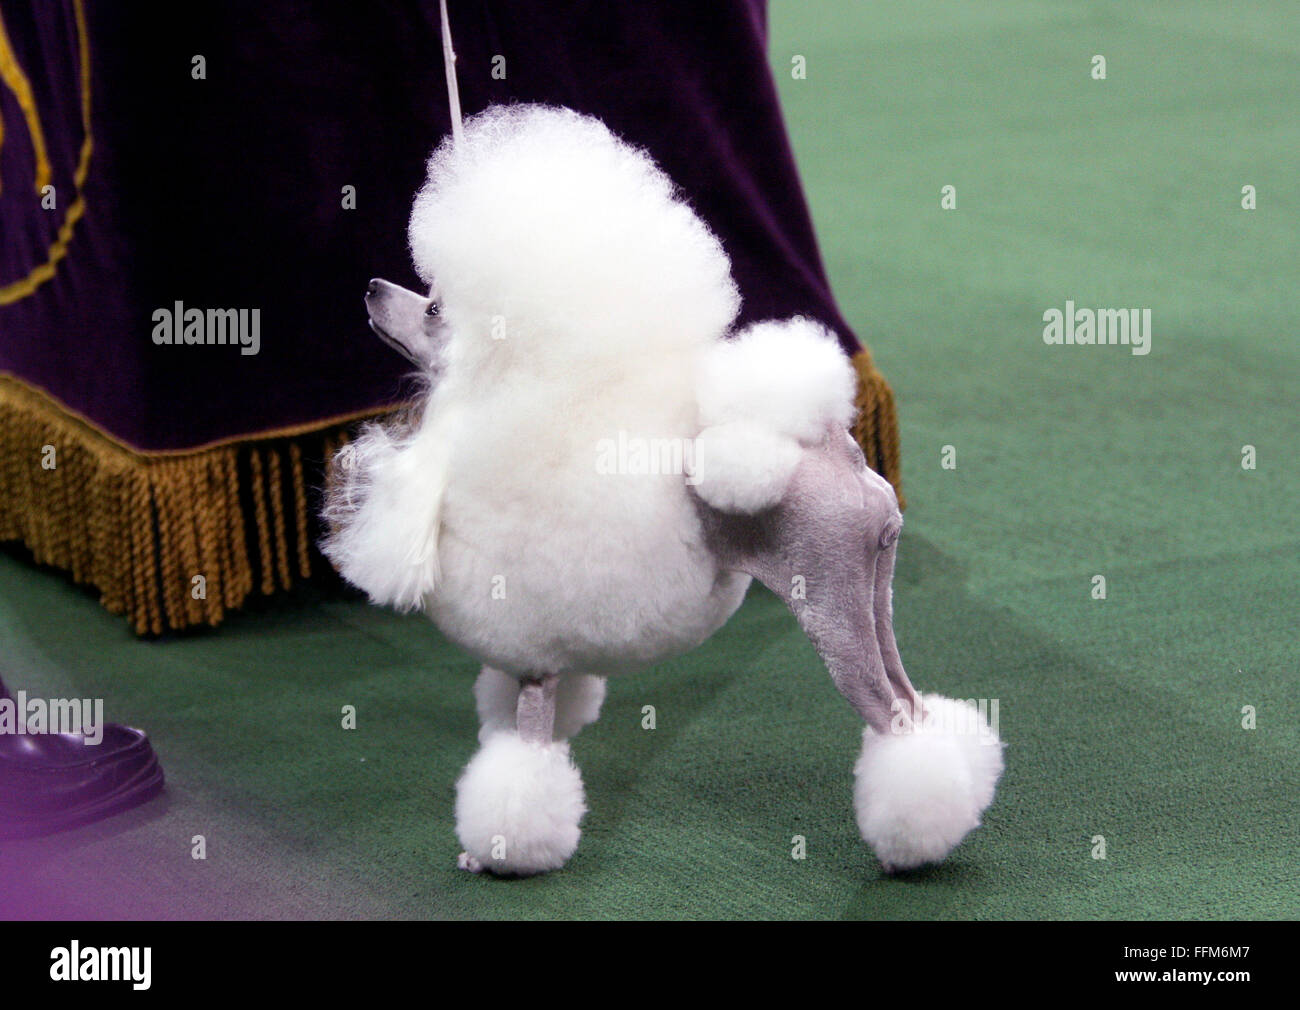 toy poodle show dog